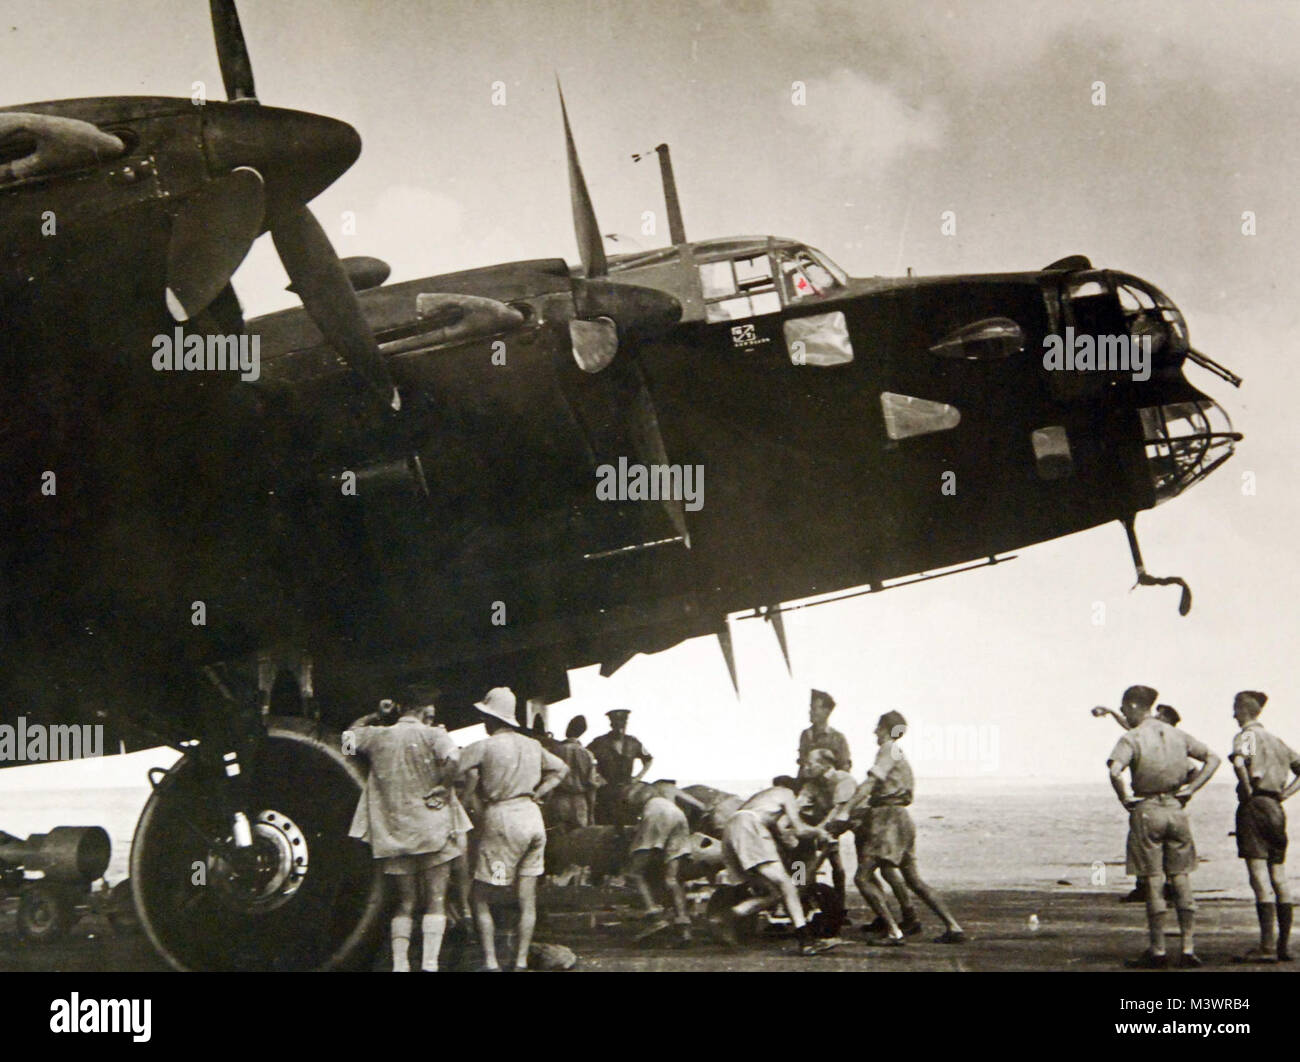 Lot-913-P-Q-4 by Photograph Curator Stock Photo